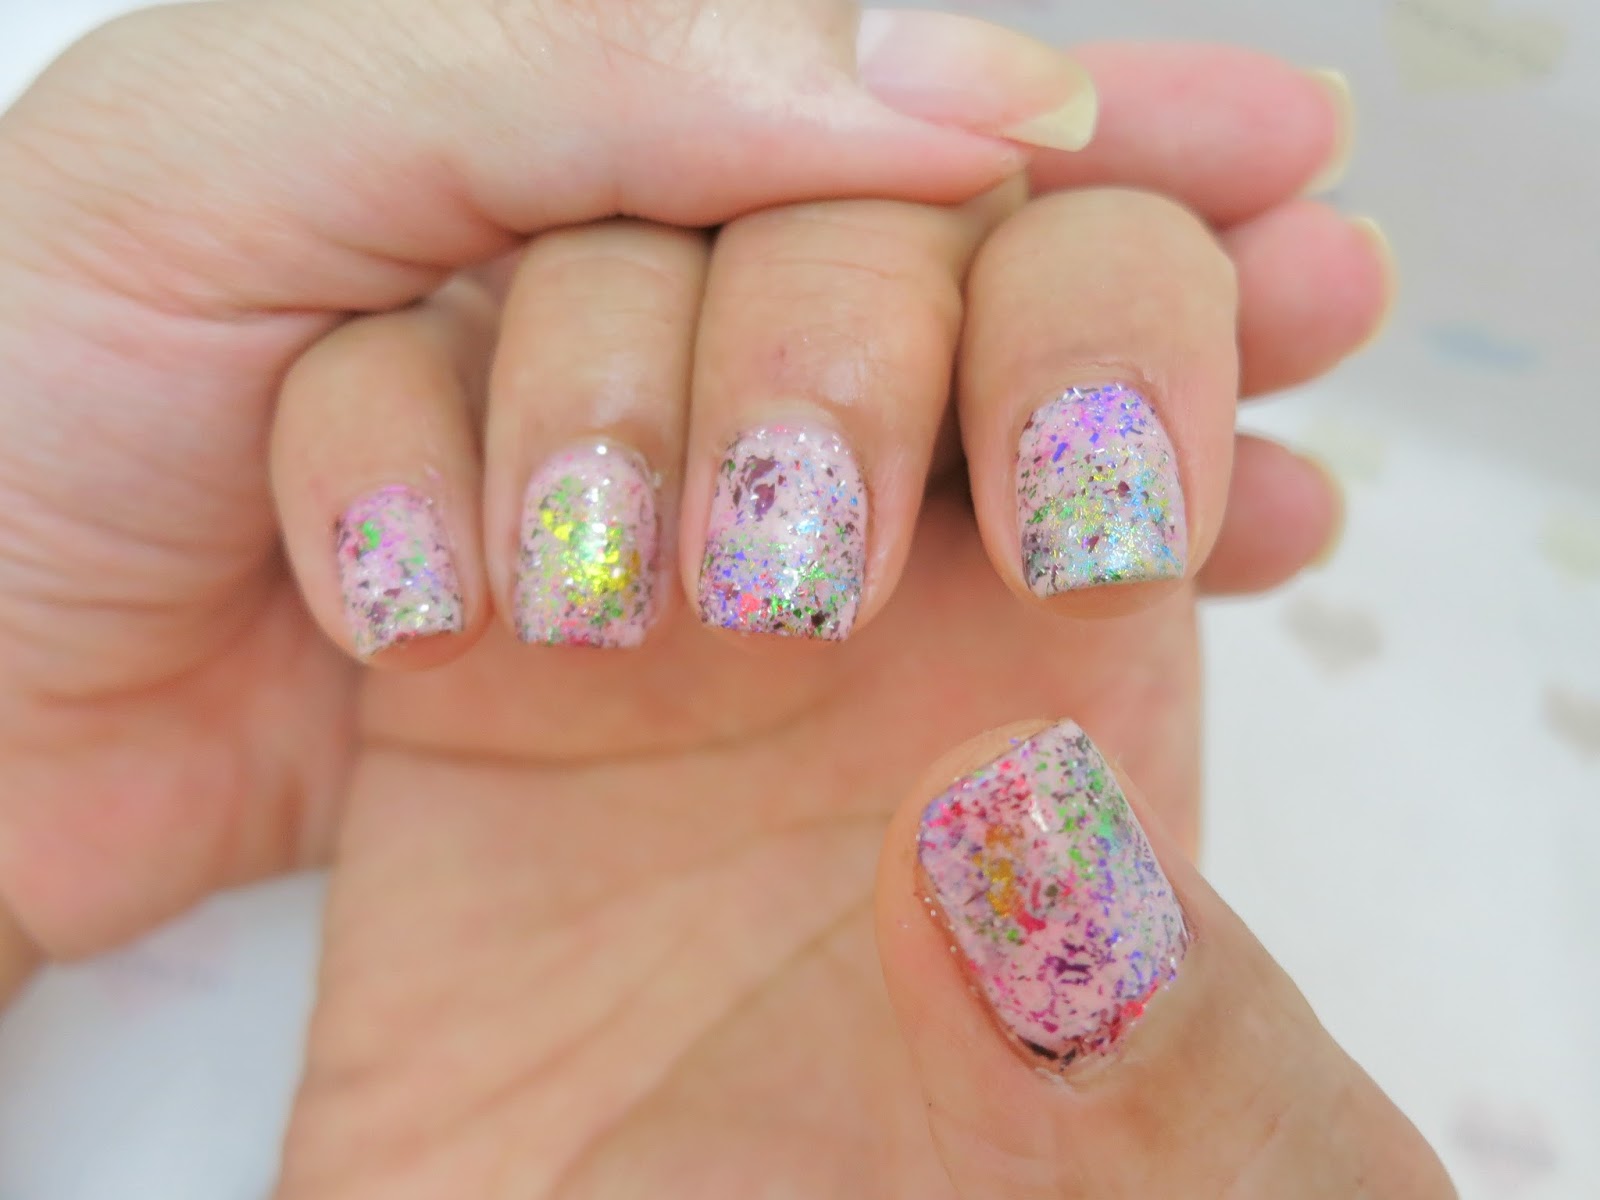 5. Foil Nail Art Ideas for Long Nails - wide 2